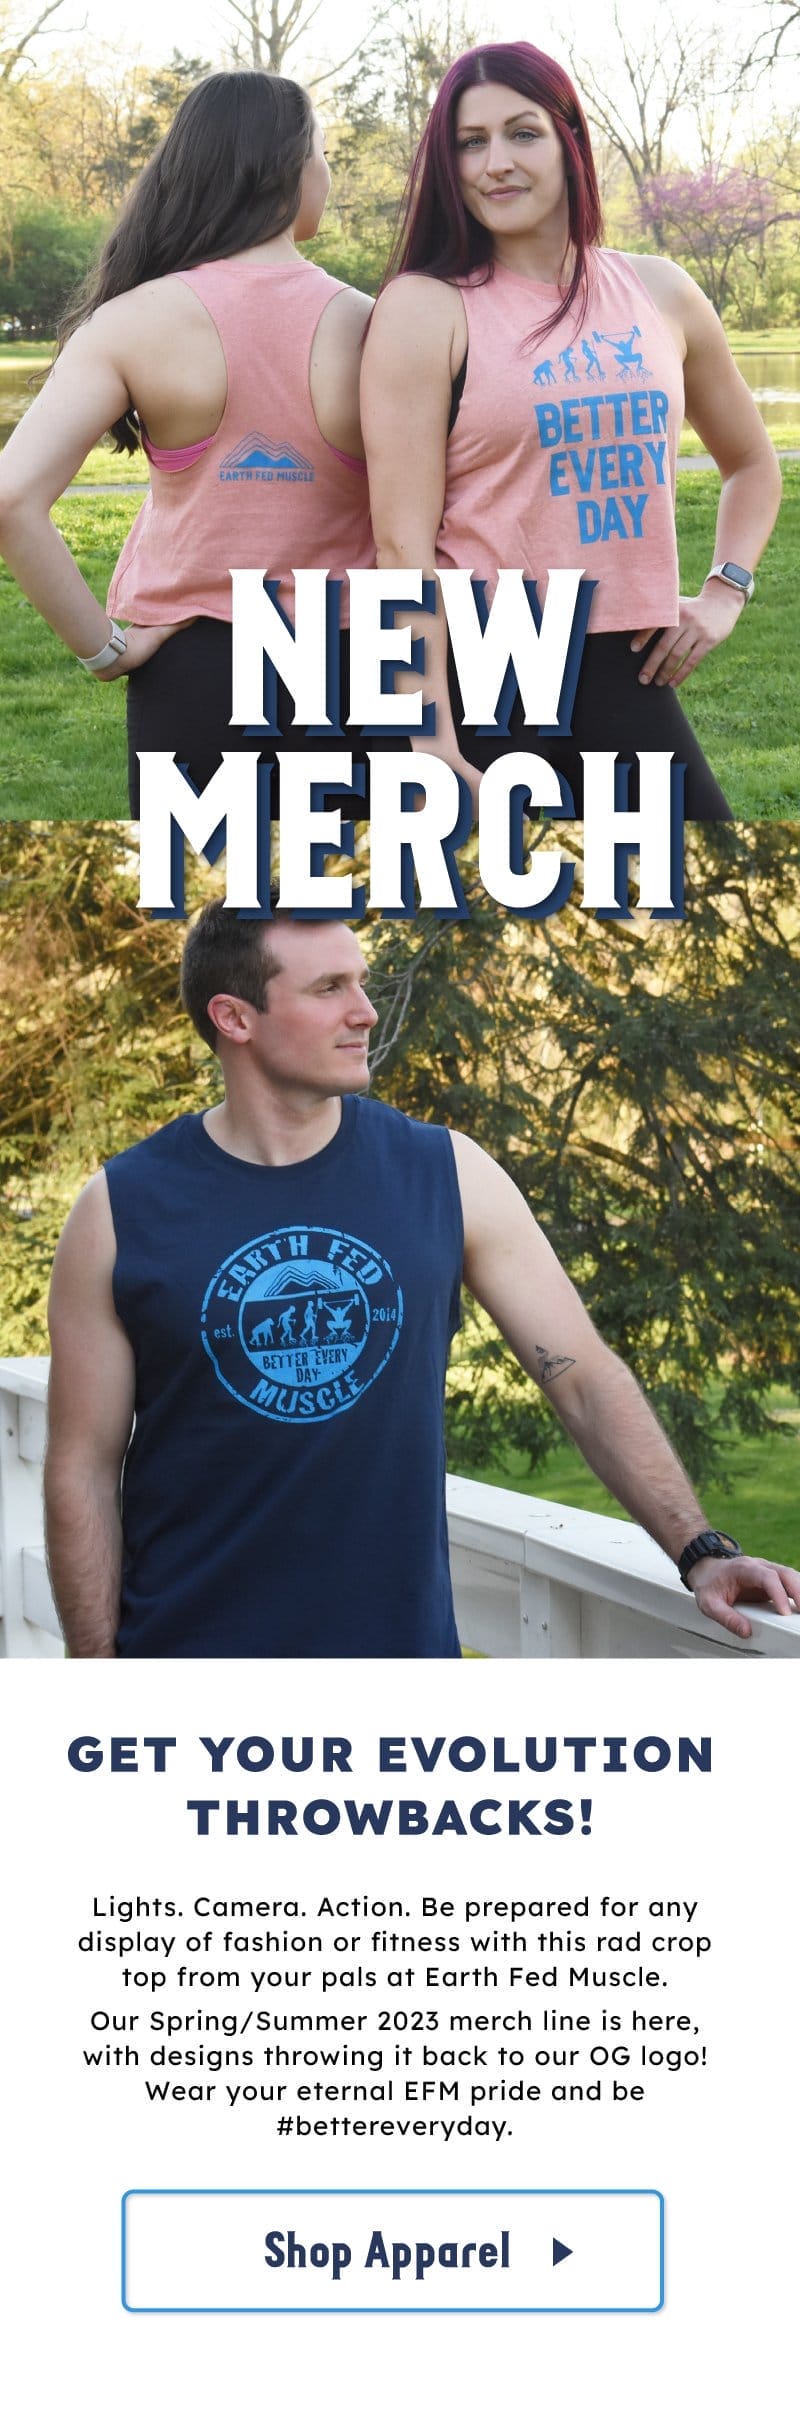 tap now to get our newest merch!